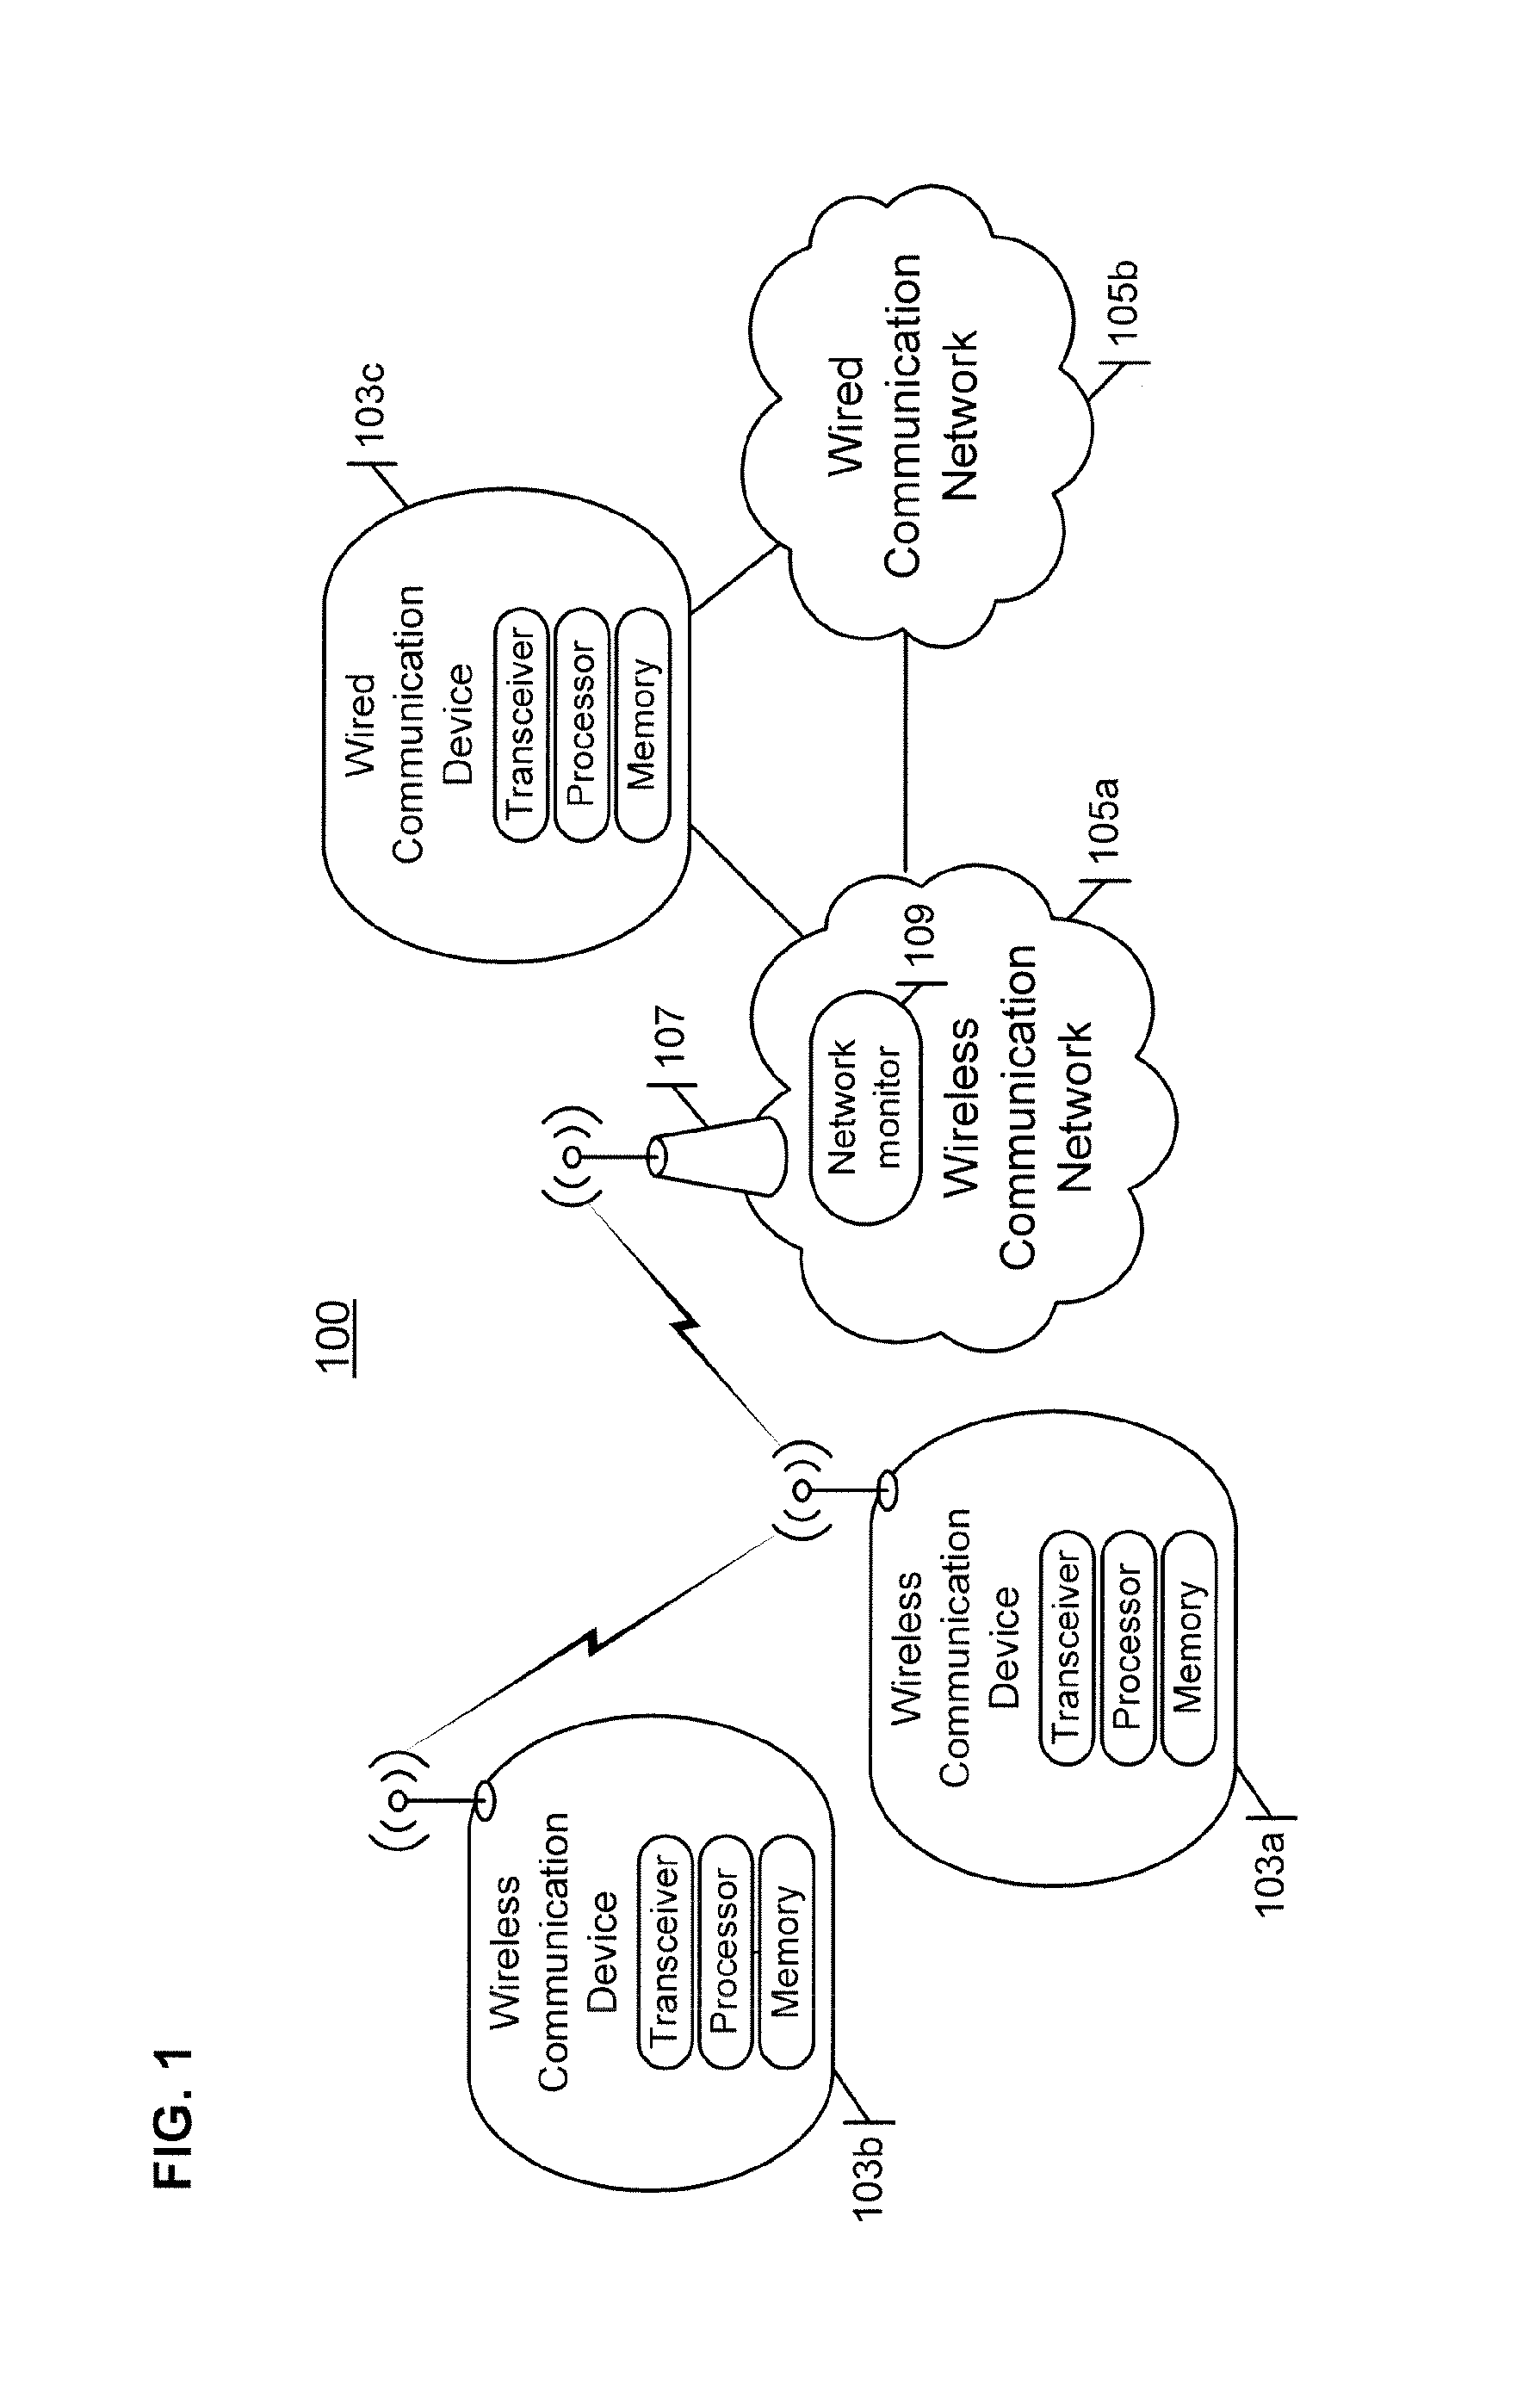 System and method for improving information carrying capacity by controlling re-transmissions